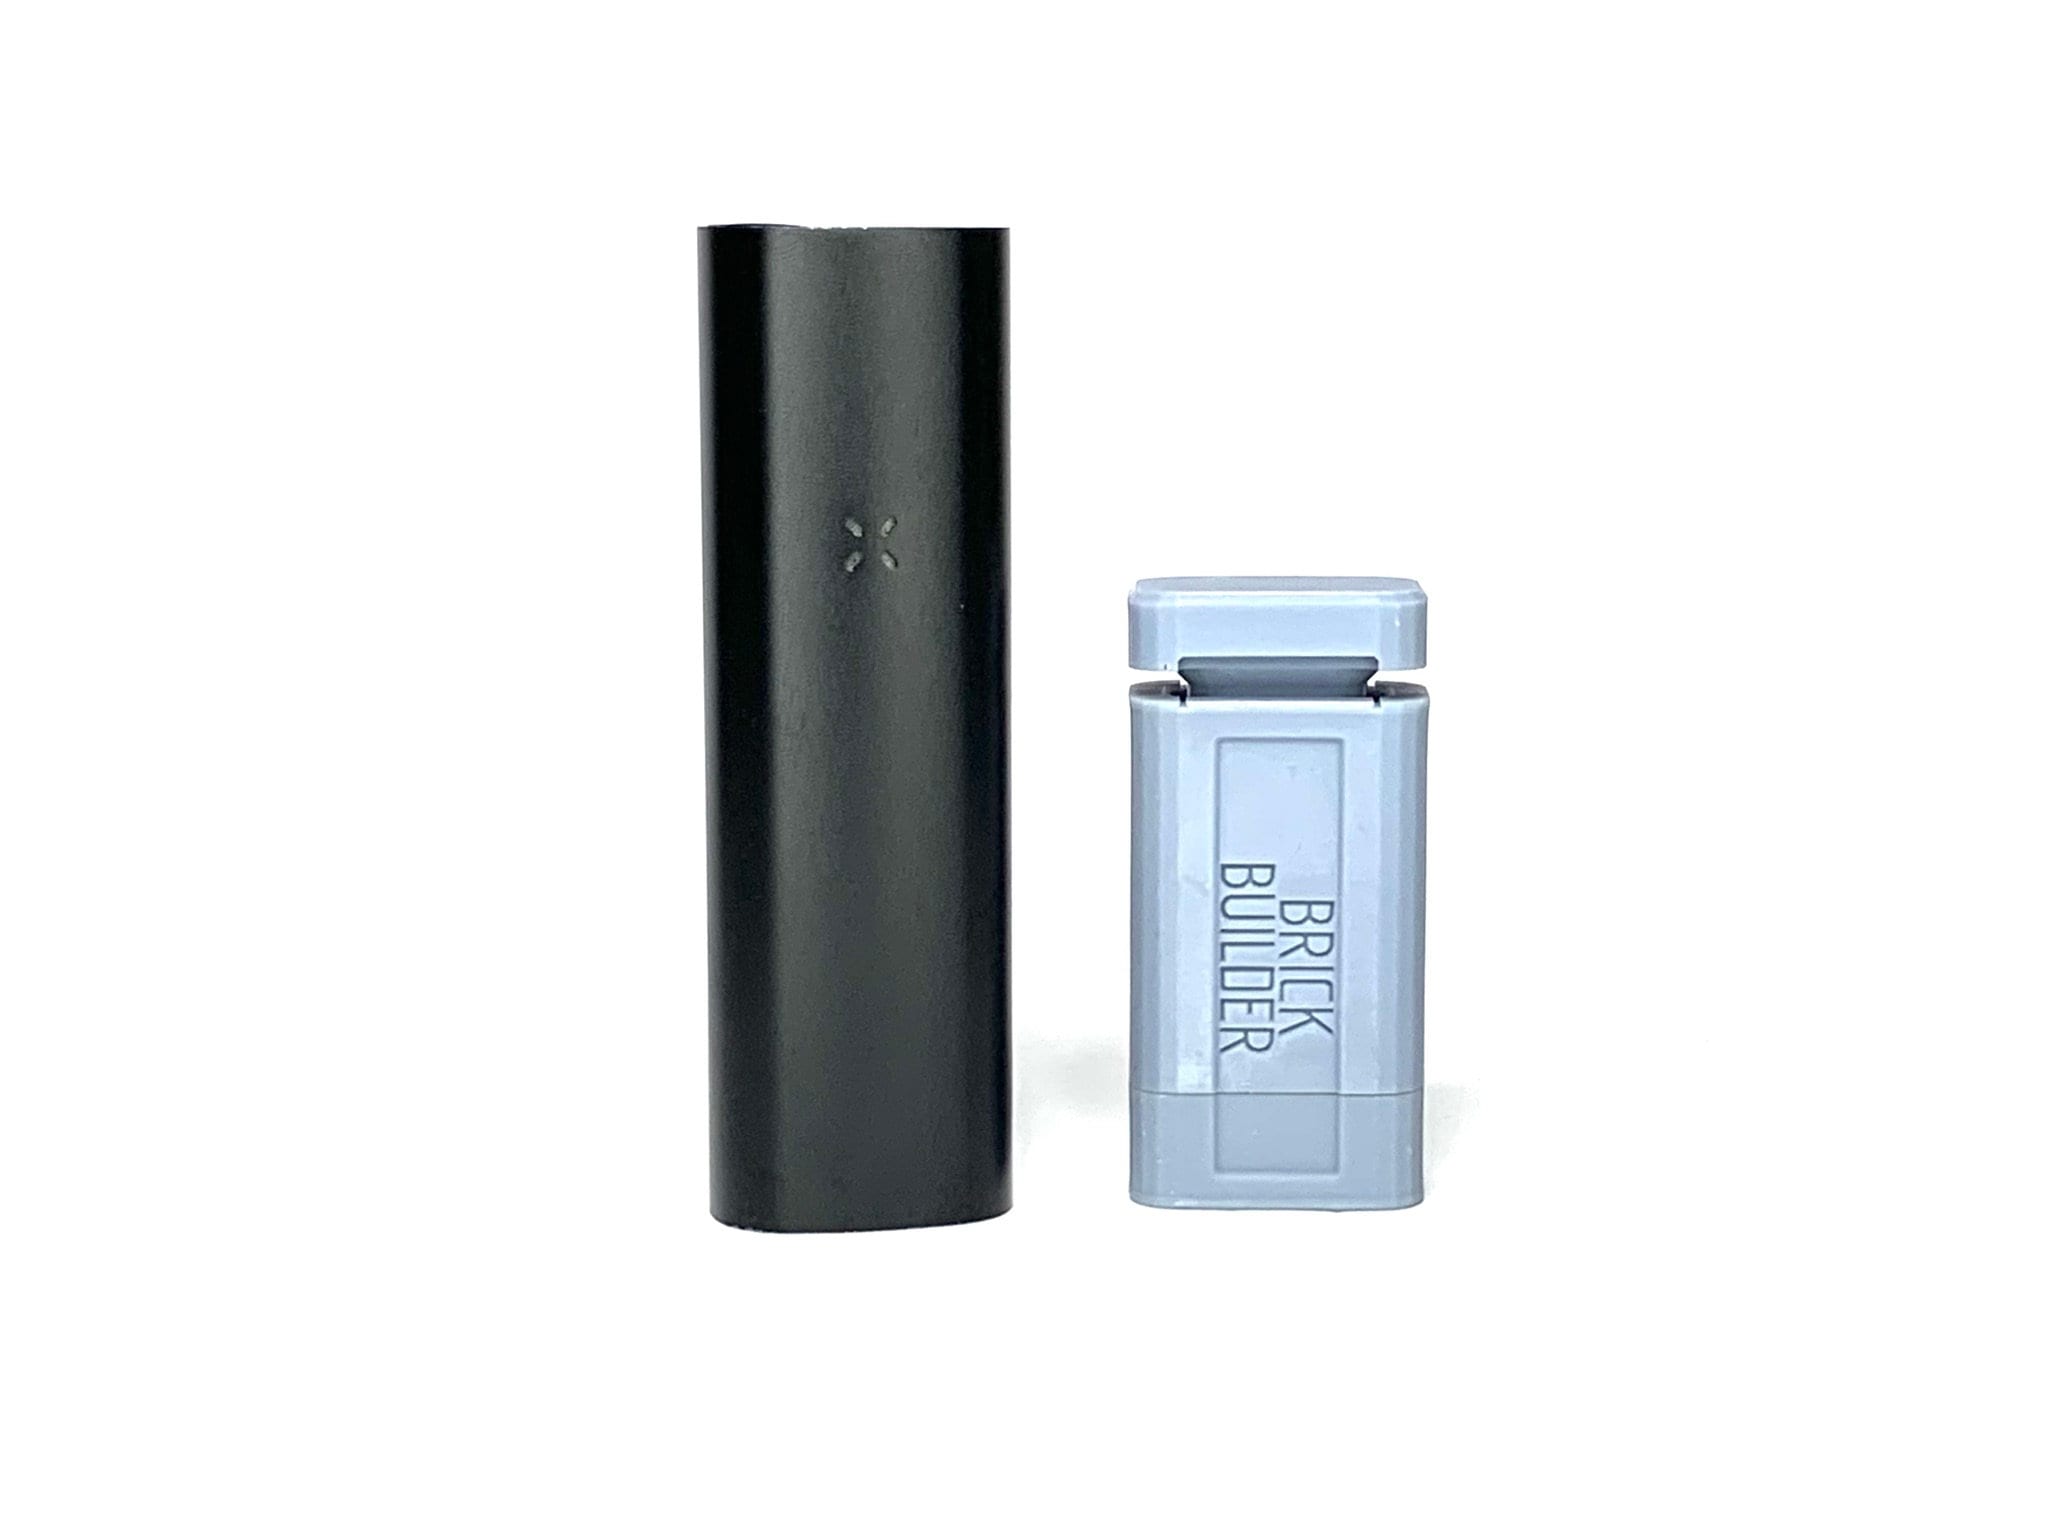 Pax Accessories - Must Have Pax 2 Accessories for Beginners